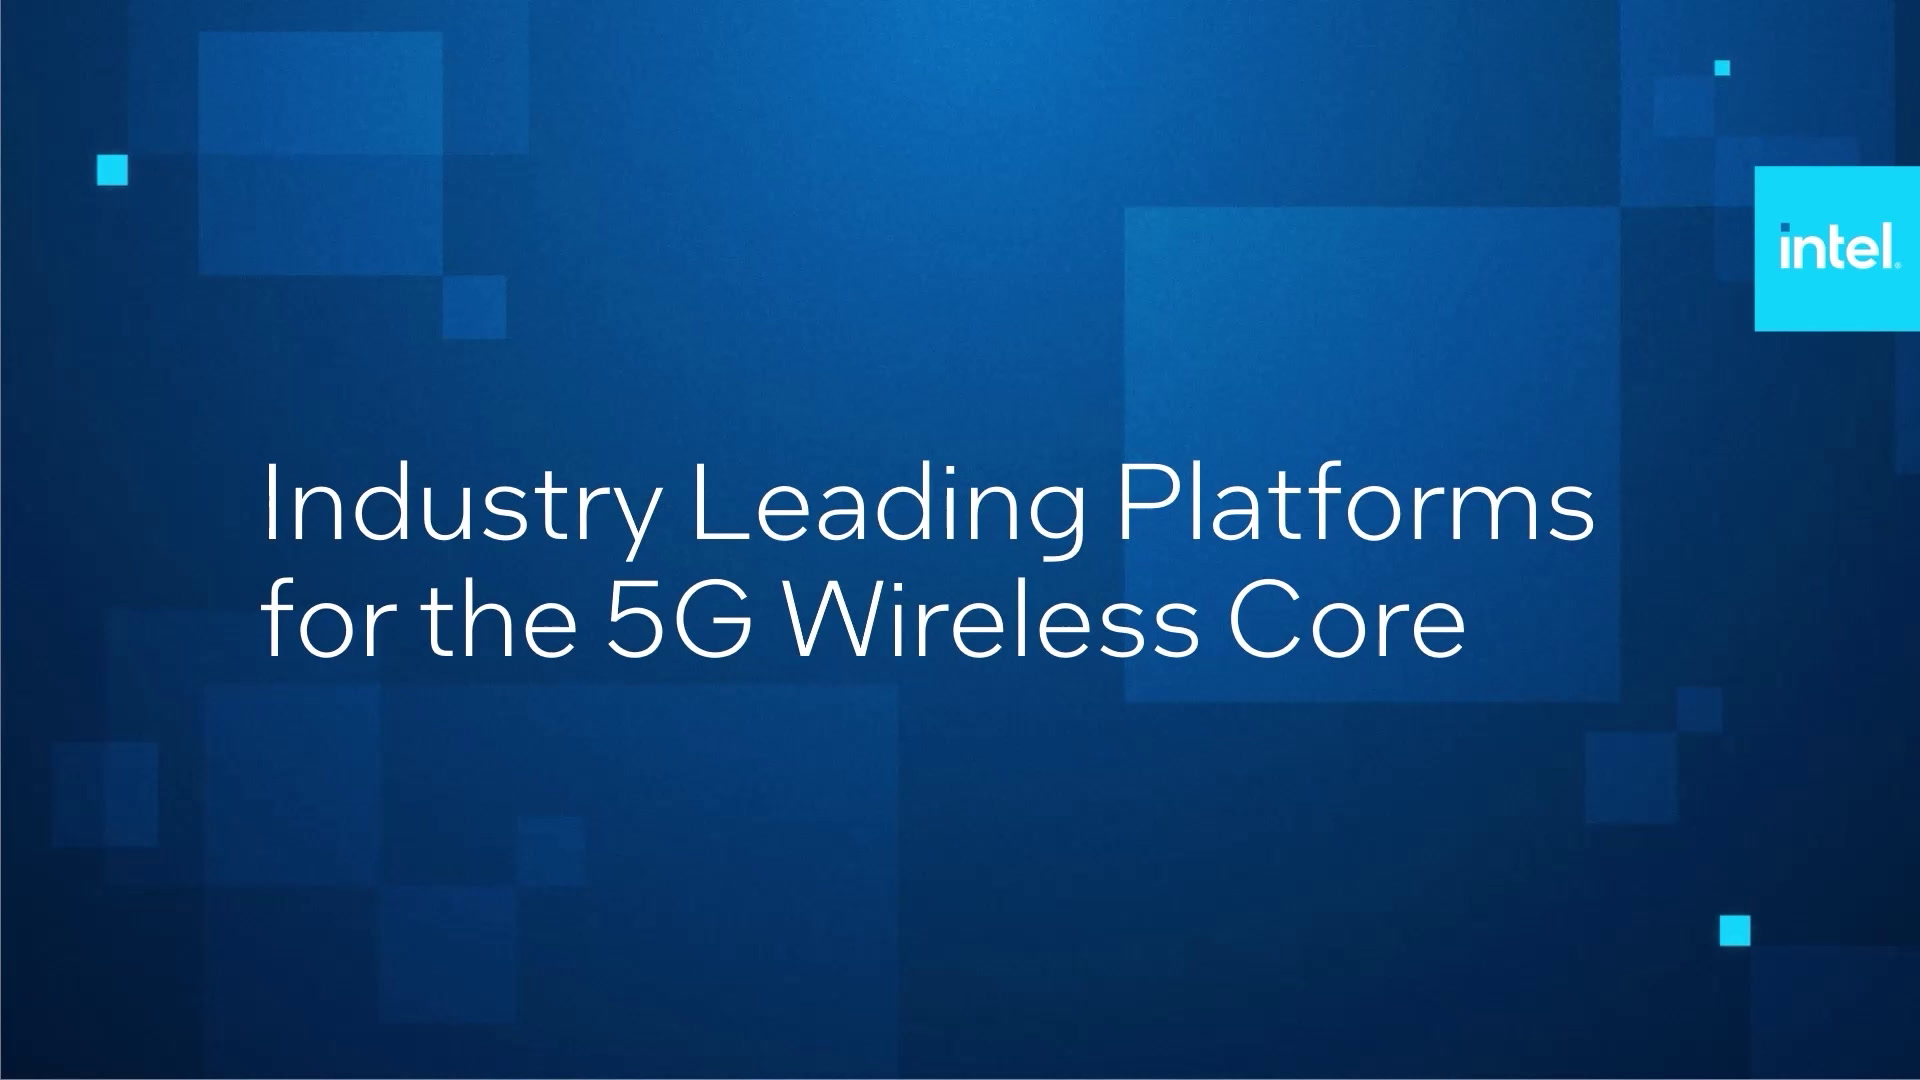 Industry Leading Platforms for the 5G Wireless Core